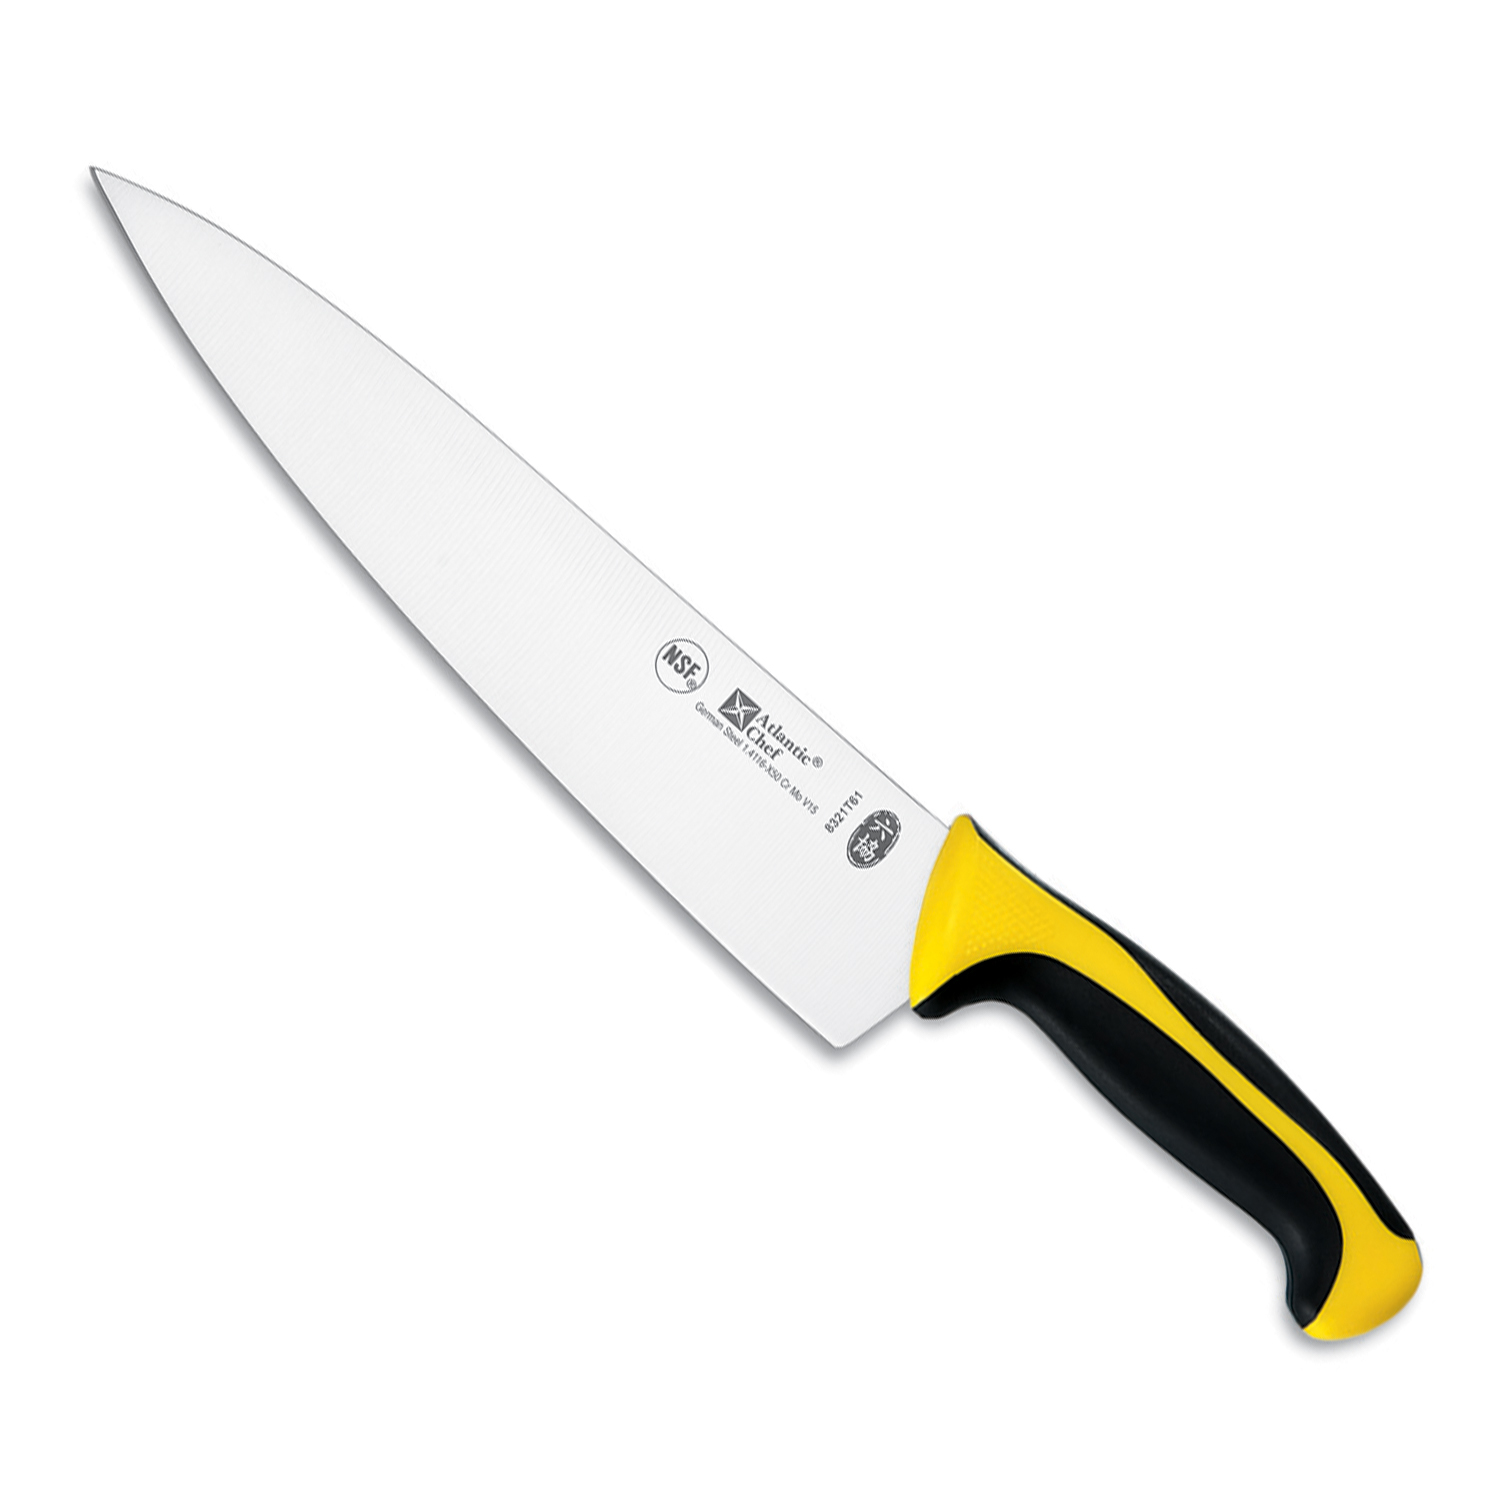 Chef's knife - Collection Yellow sea